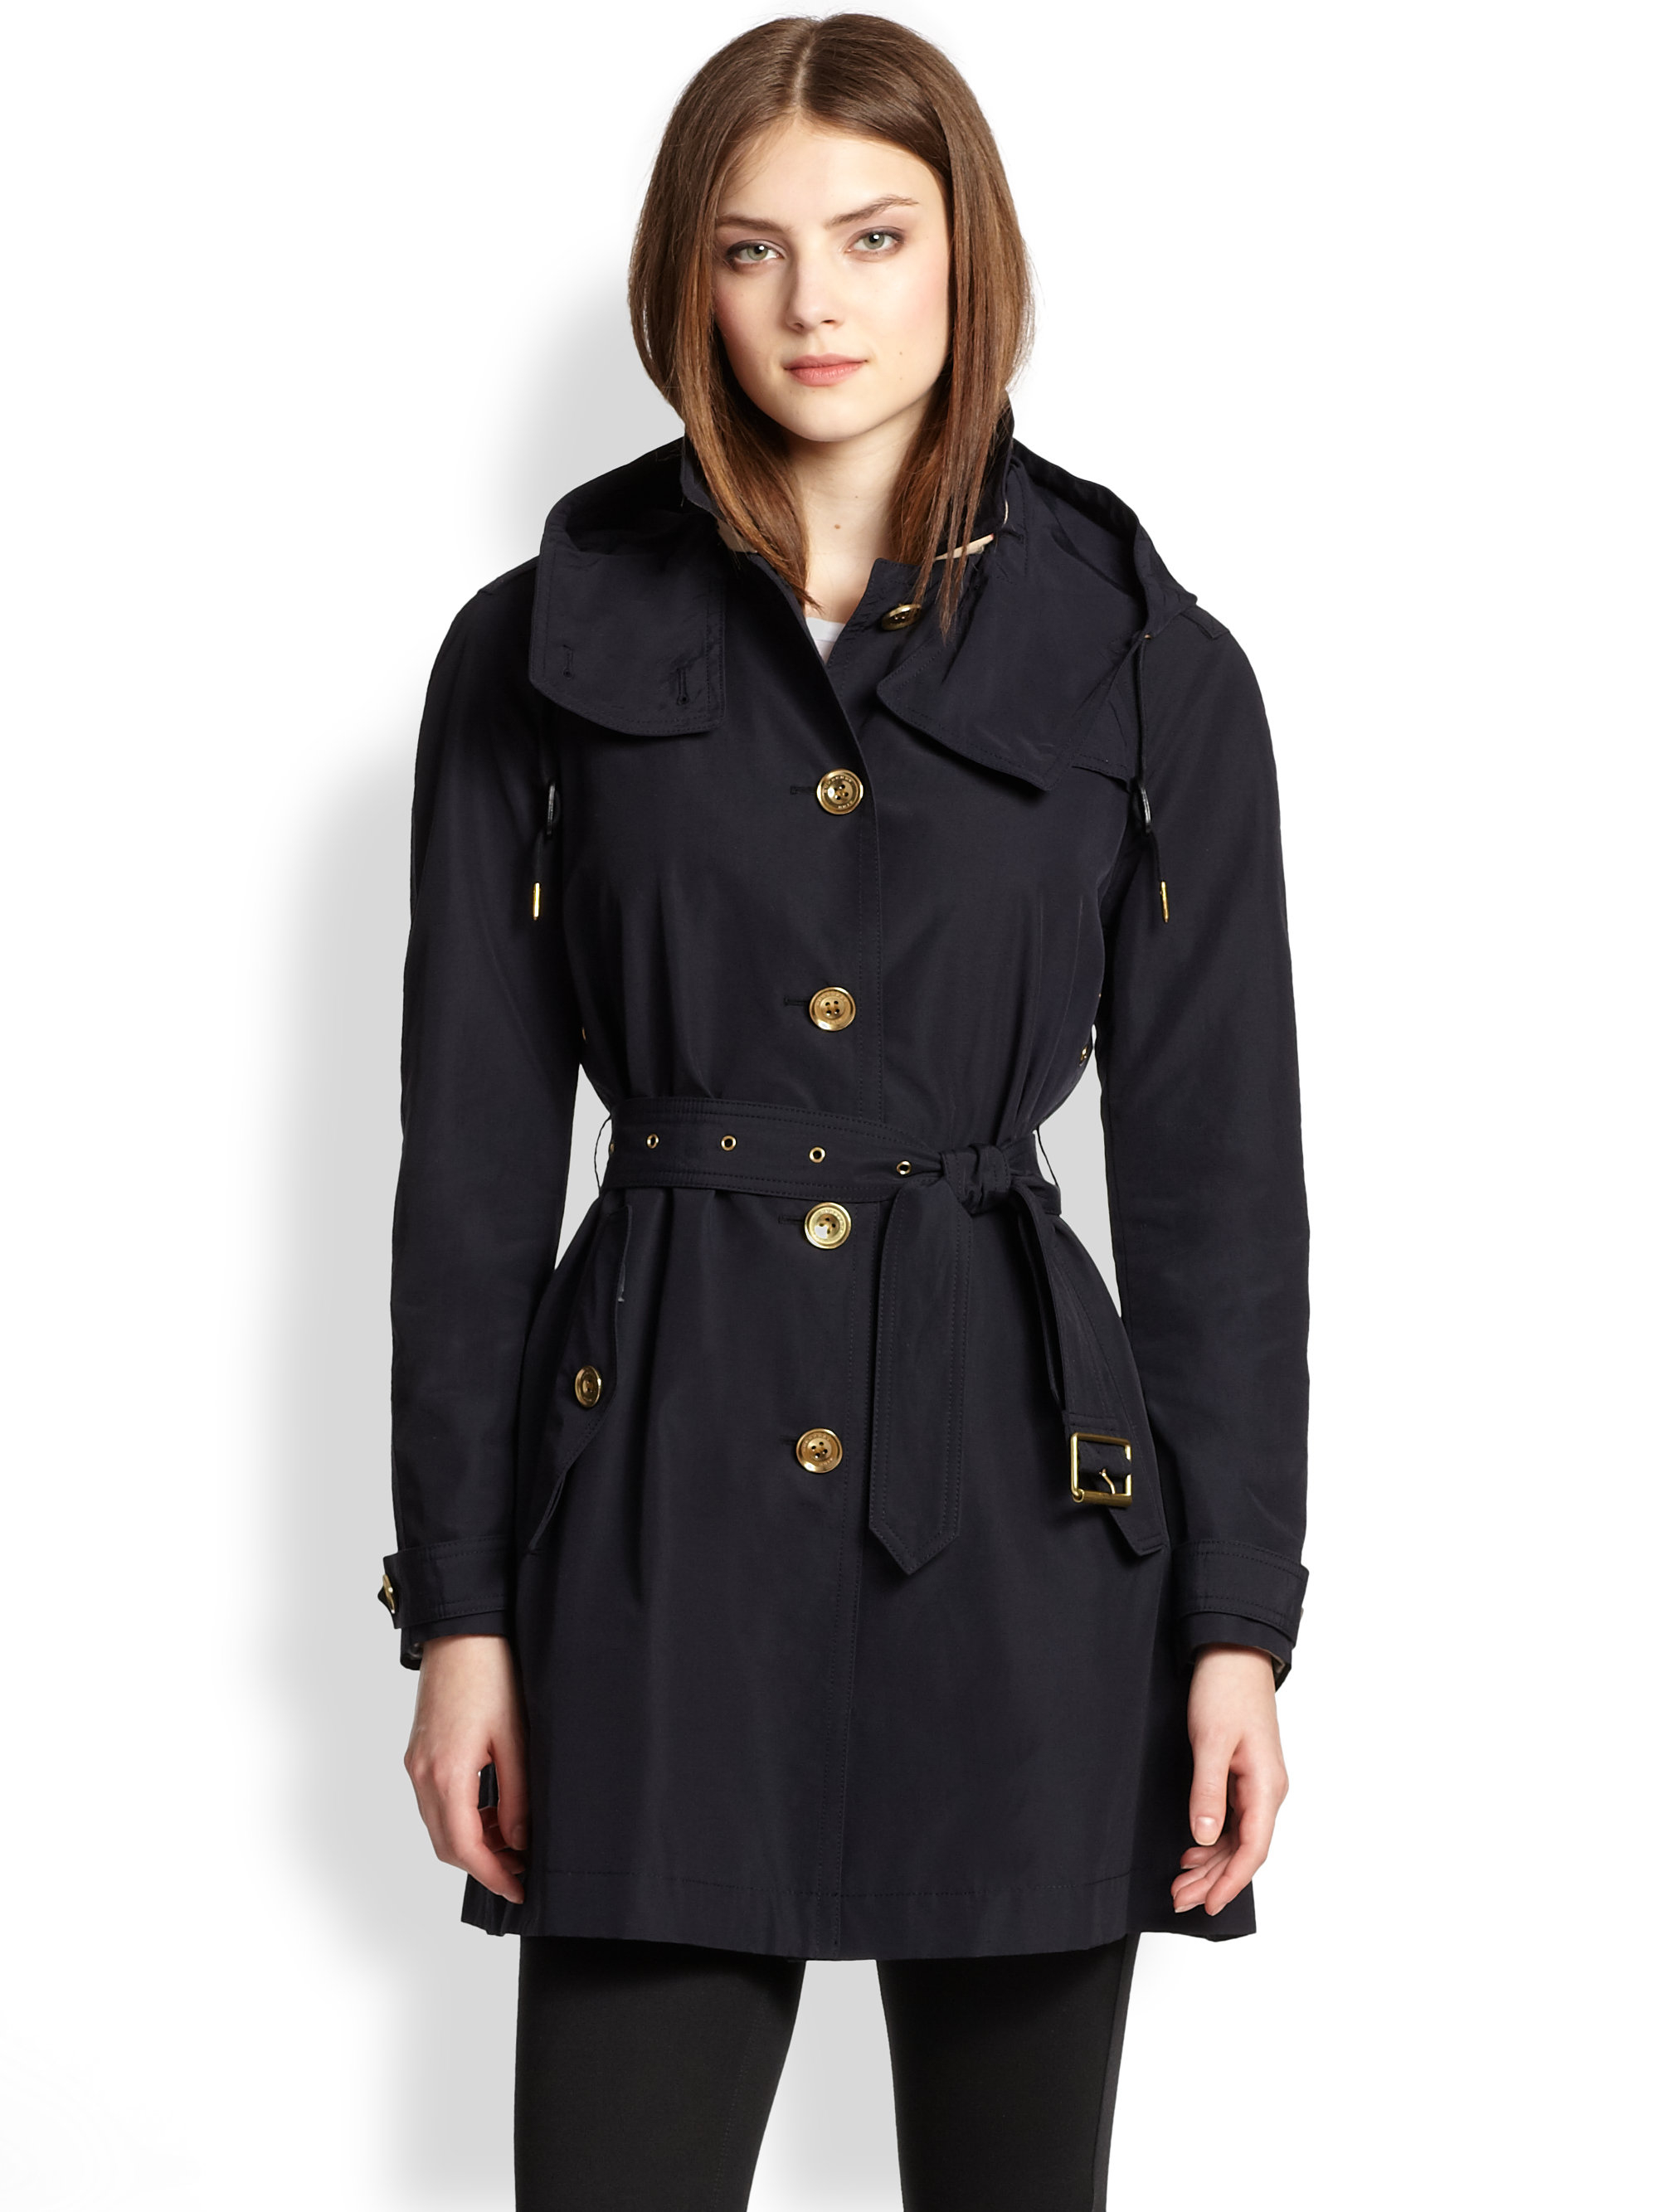 Lyst - Burberry brit Levinford Trench Coat in Blue